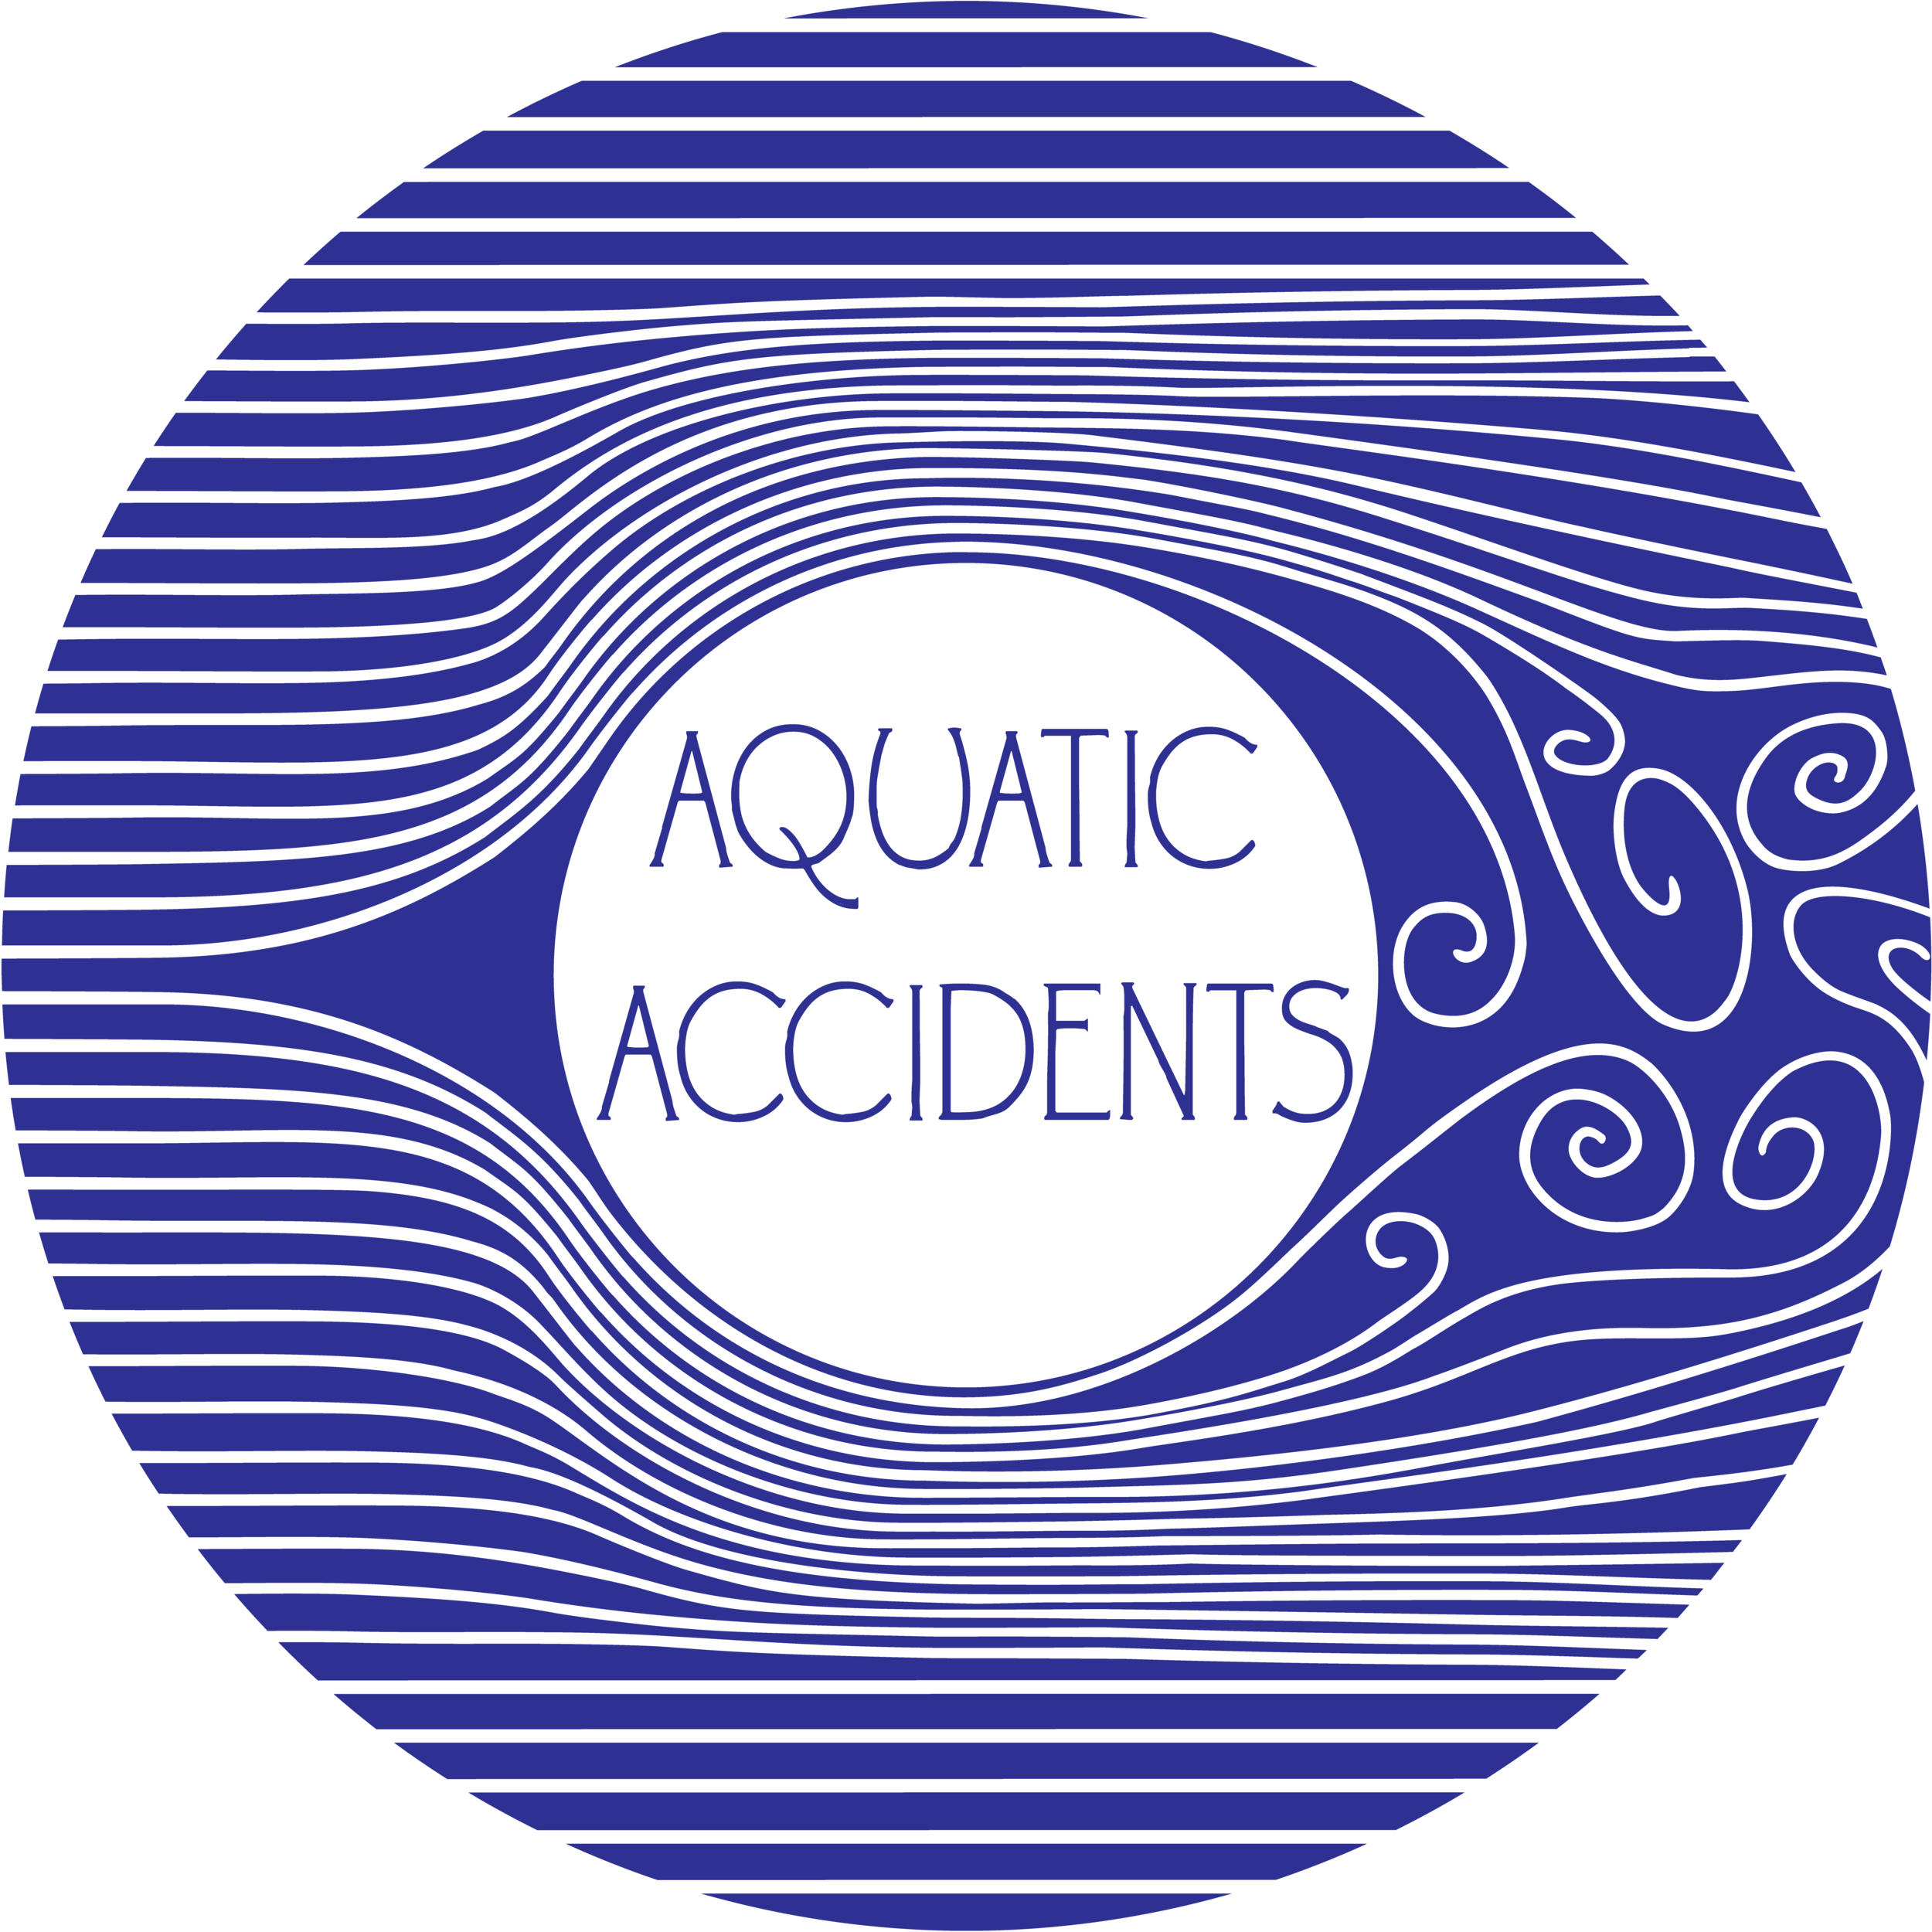 Aquatic Accidents: Expert witness consulting by Ph.D. Scientists